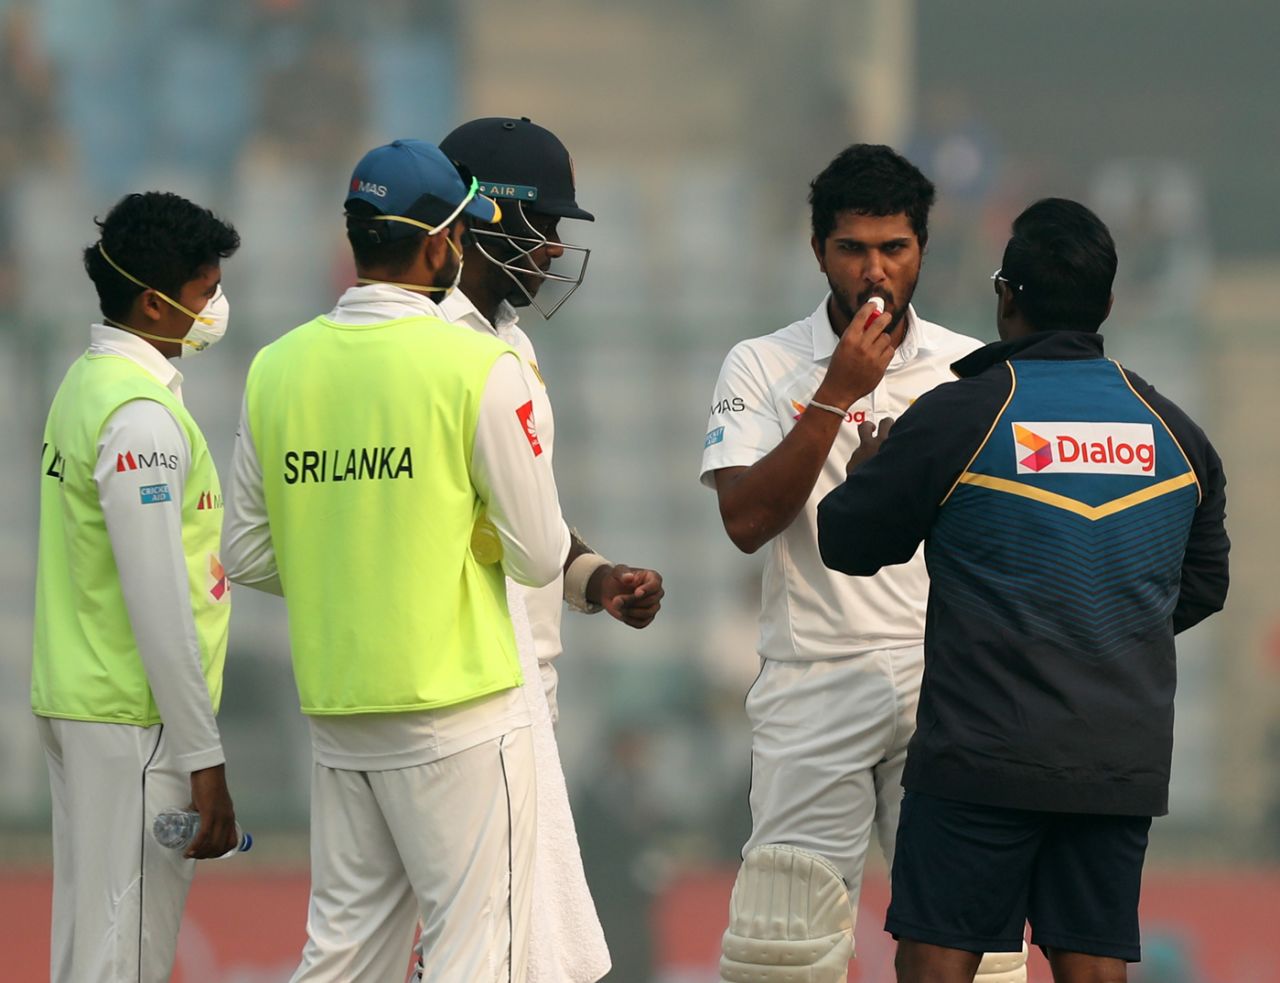 Dinesh Chandimal was tended to by the physio on account of breathing issues, India v Sri Lanka, 3rd Test, Delhi, 3rd day, December 4, 2017